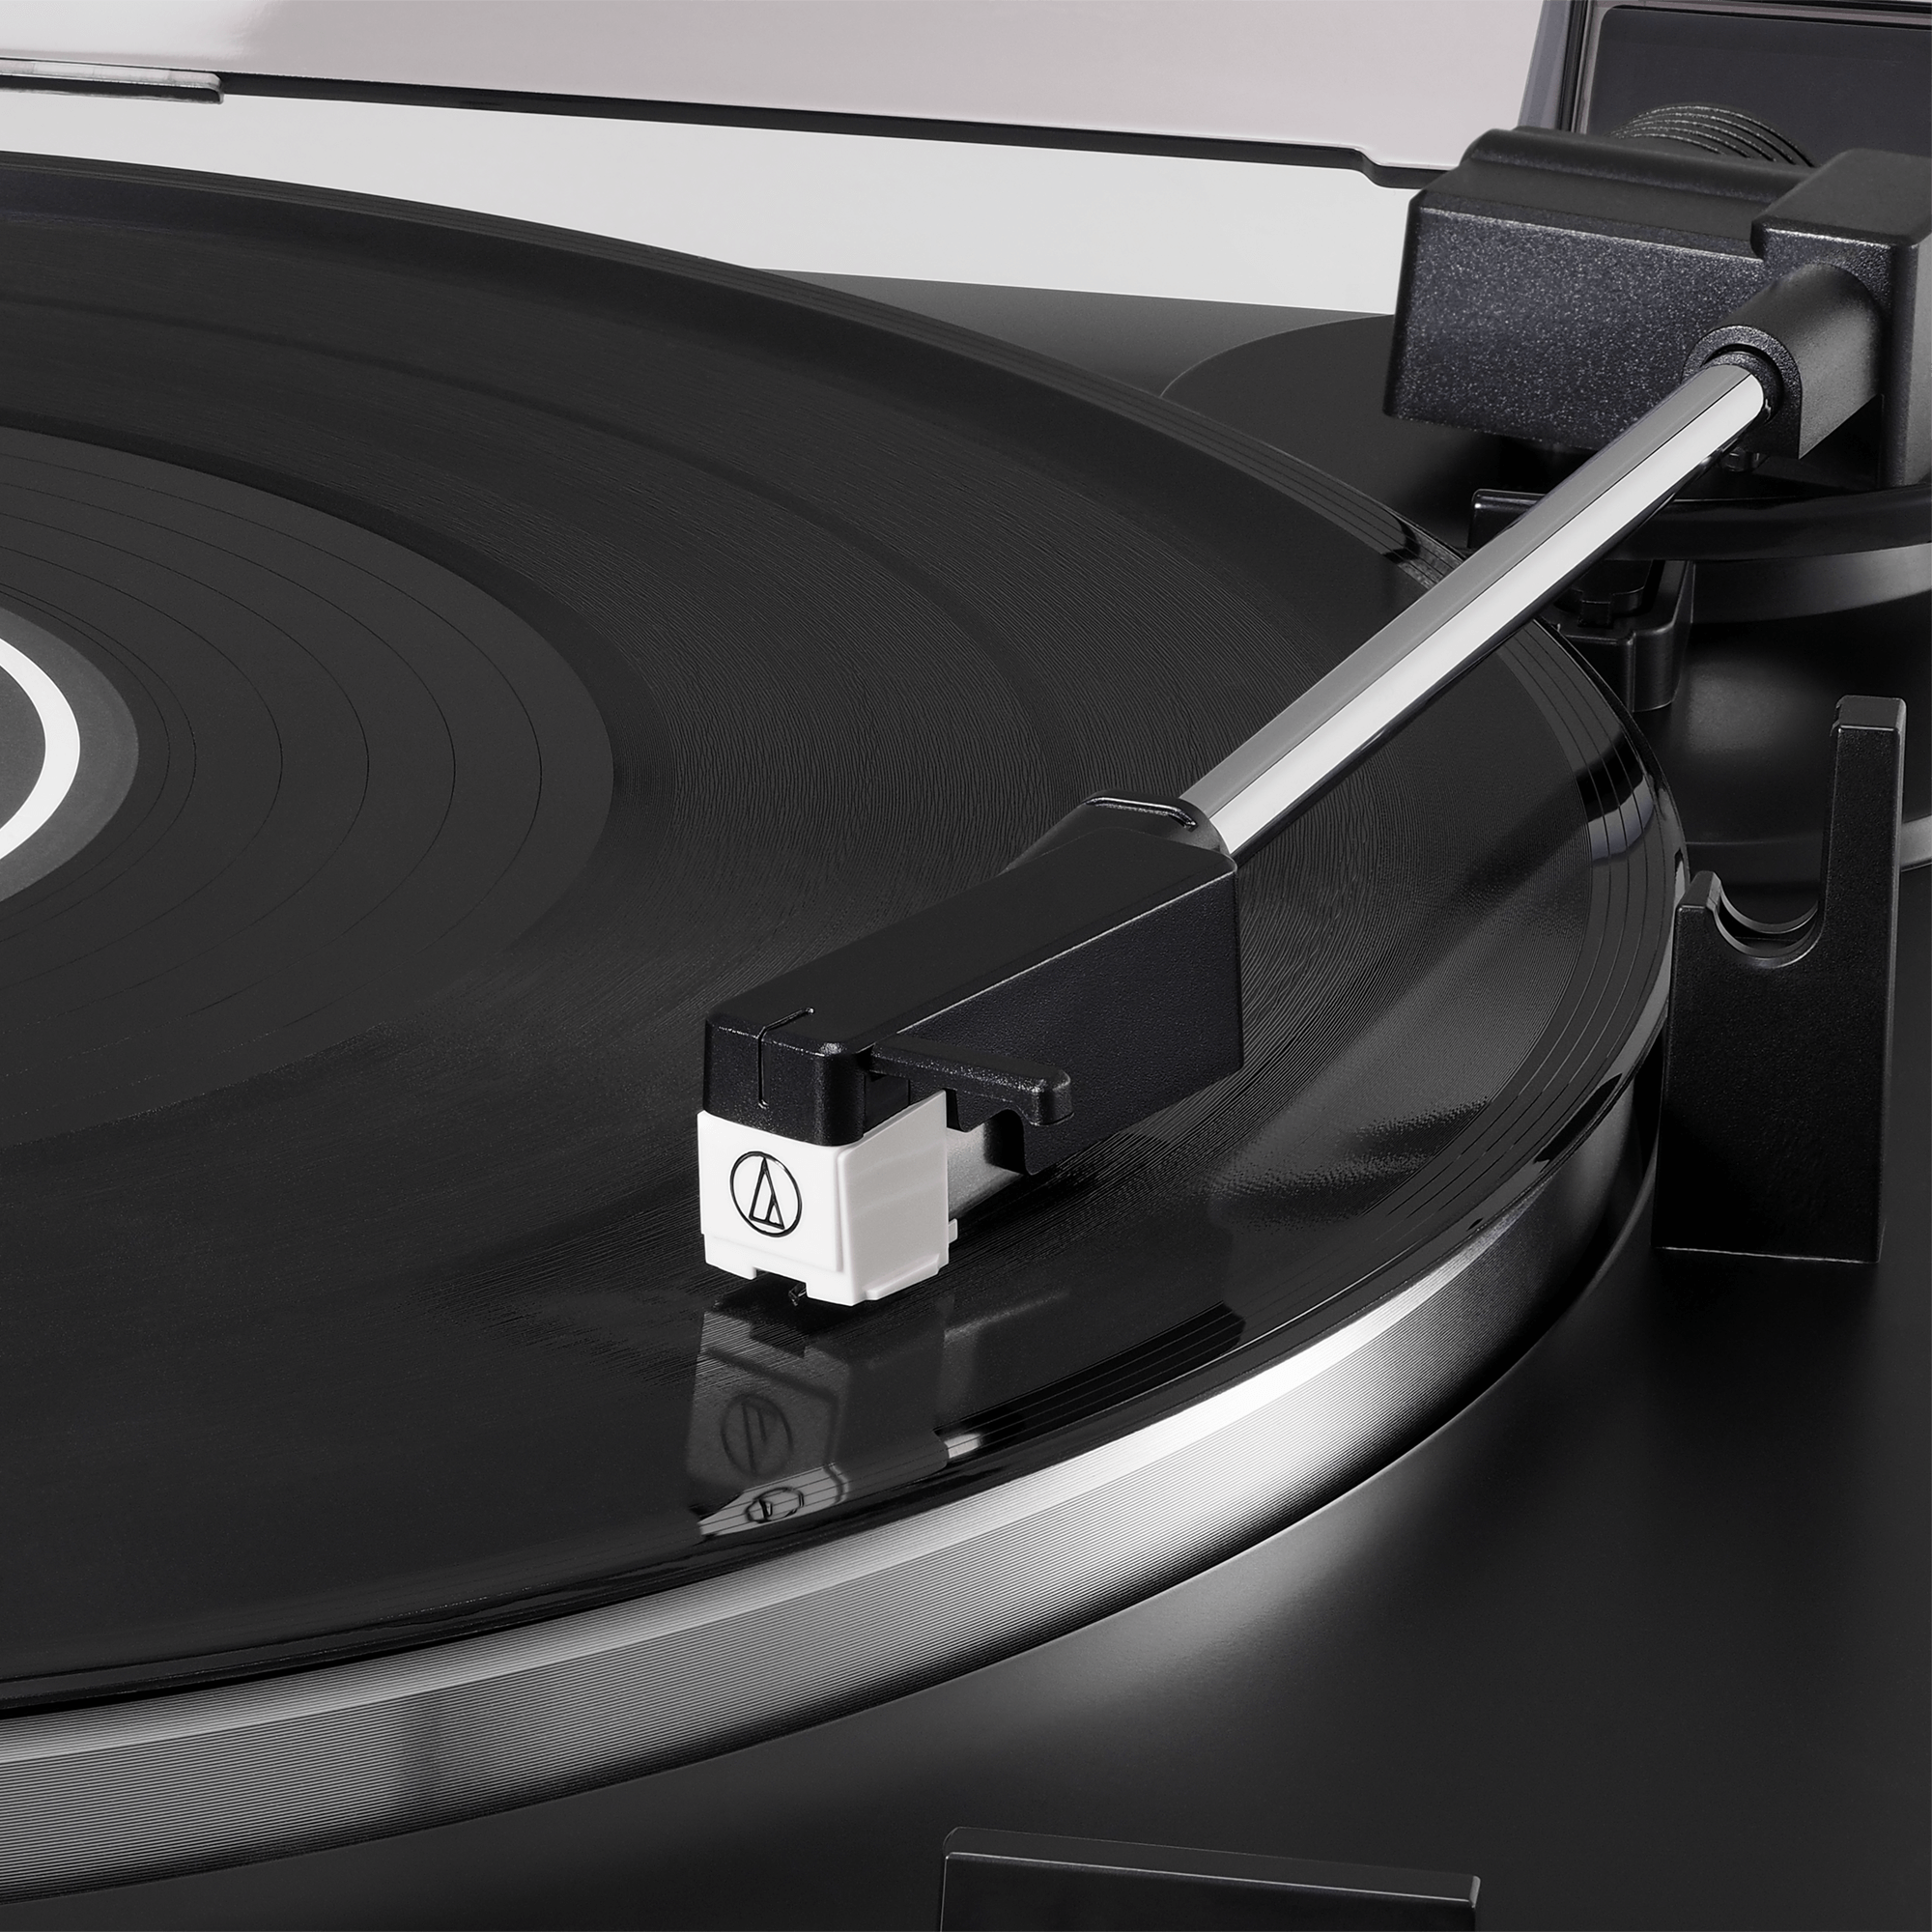 Fully Automatic Belt-Drive Turntable, AT-LP60XGM-CR Certified Refurbished